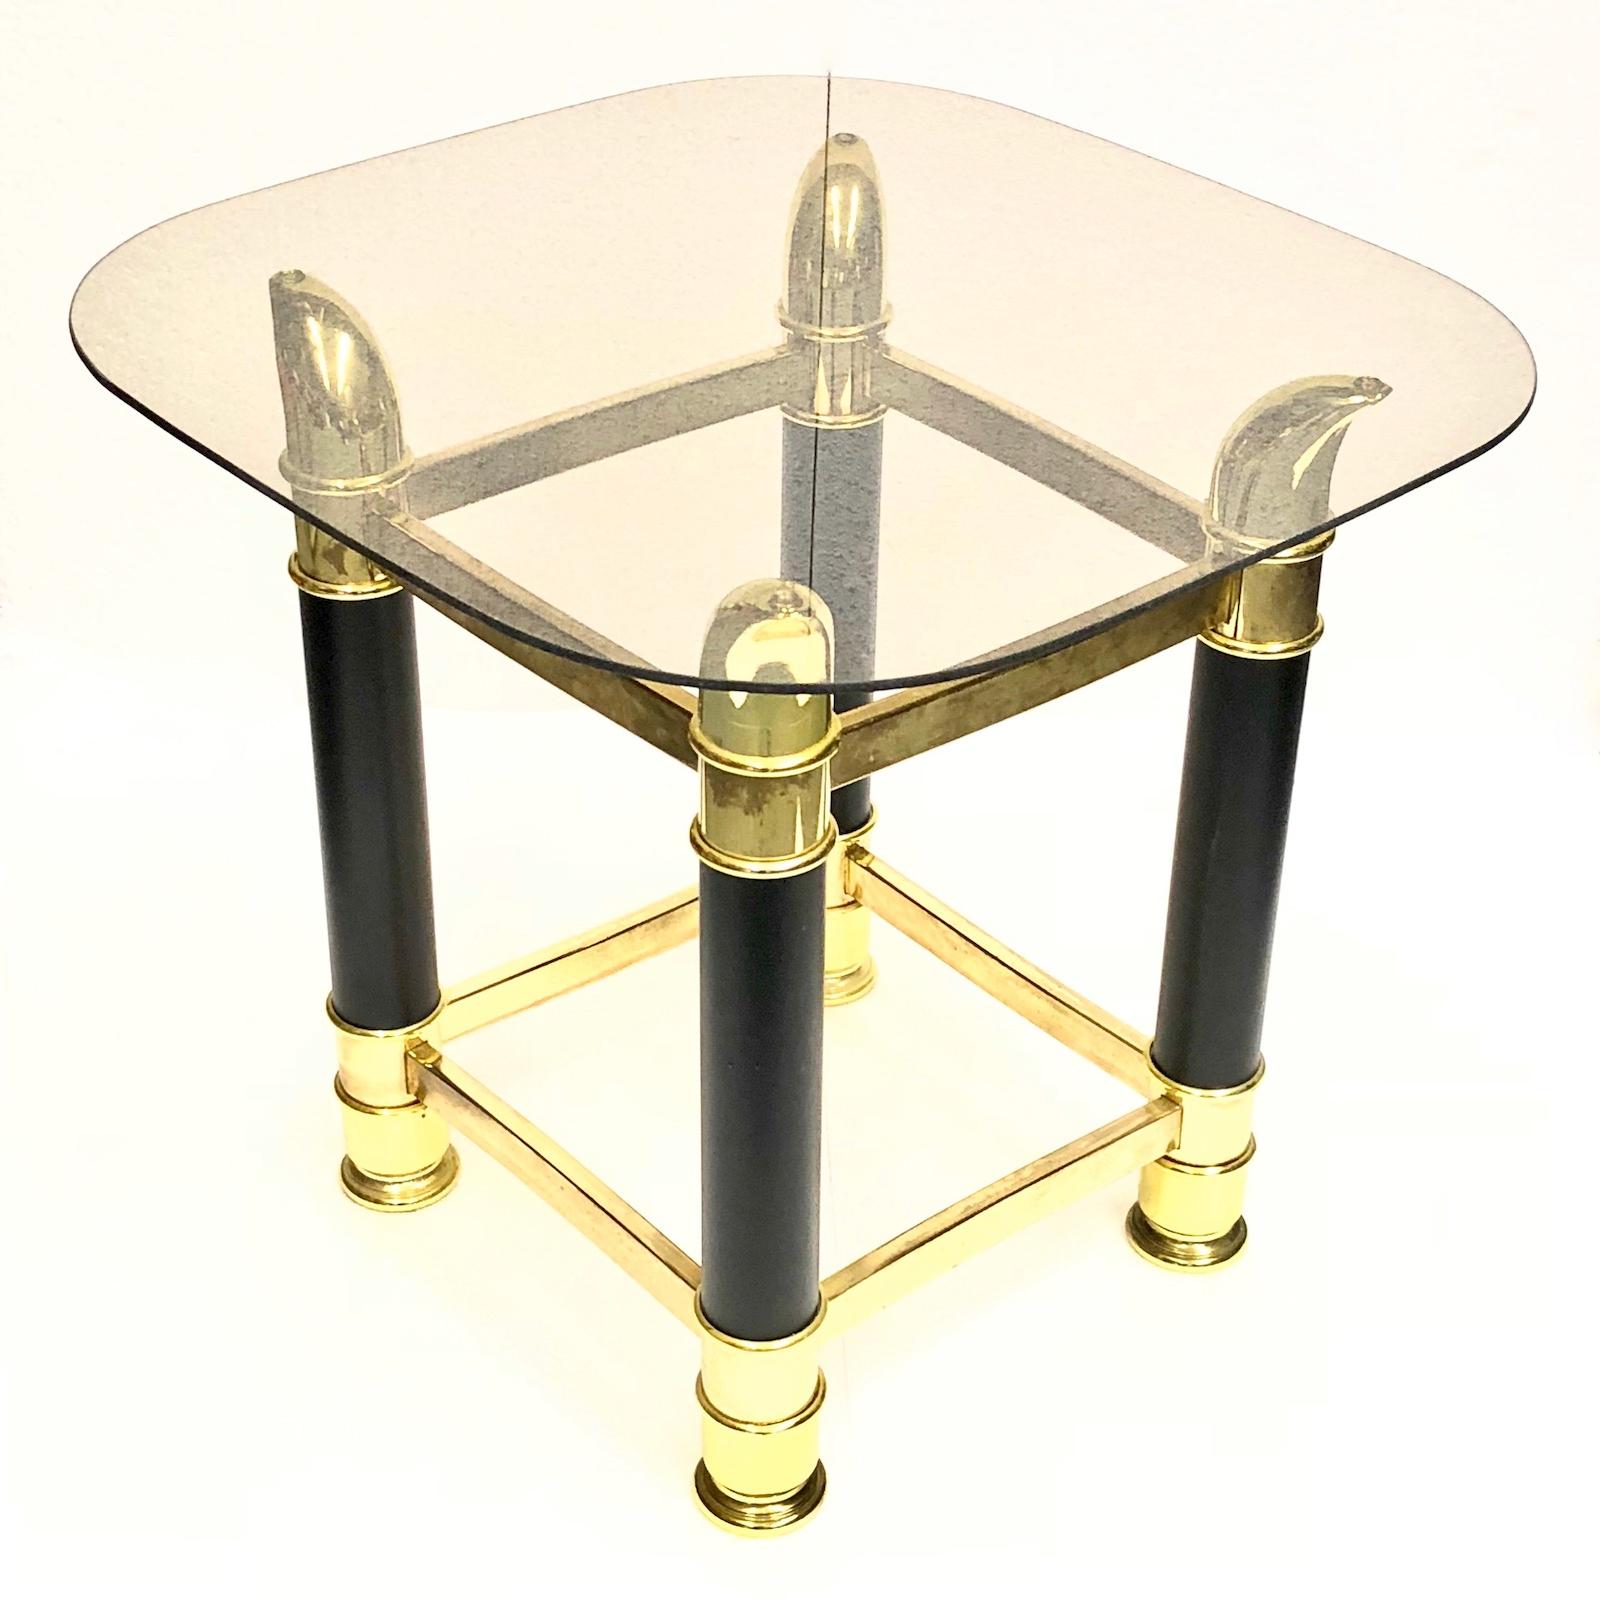 Italian Midcentury Brass and Glass Side Table, 1970s For Sale 5